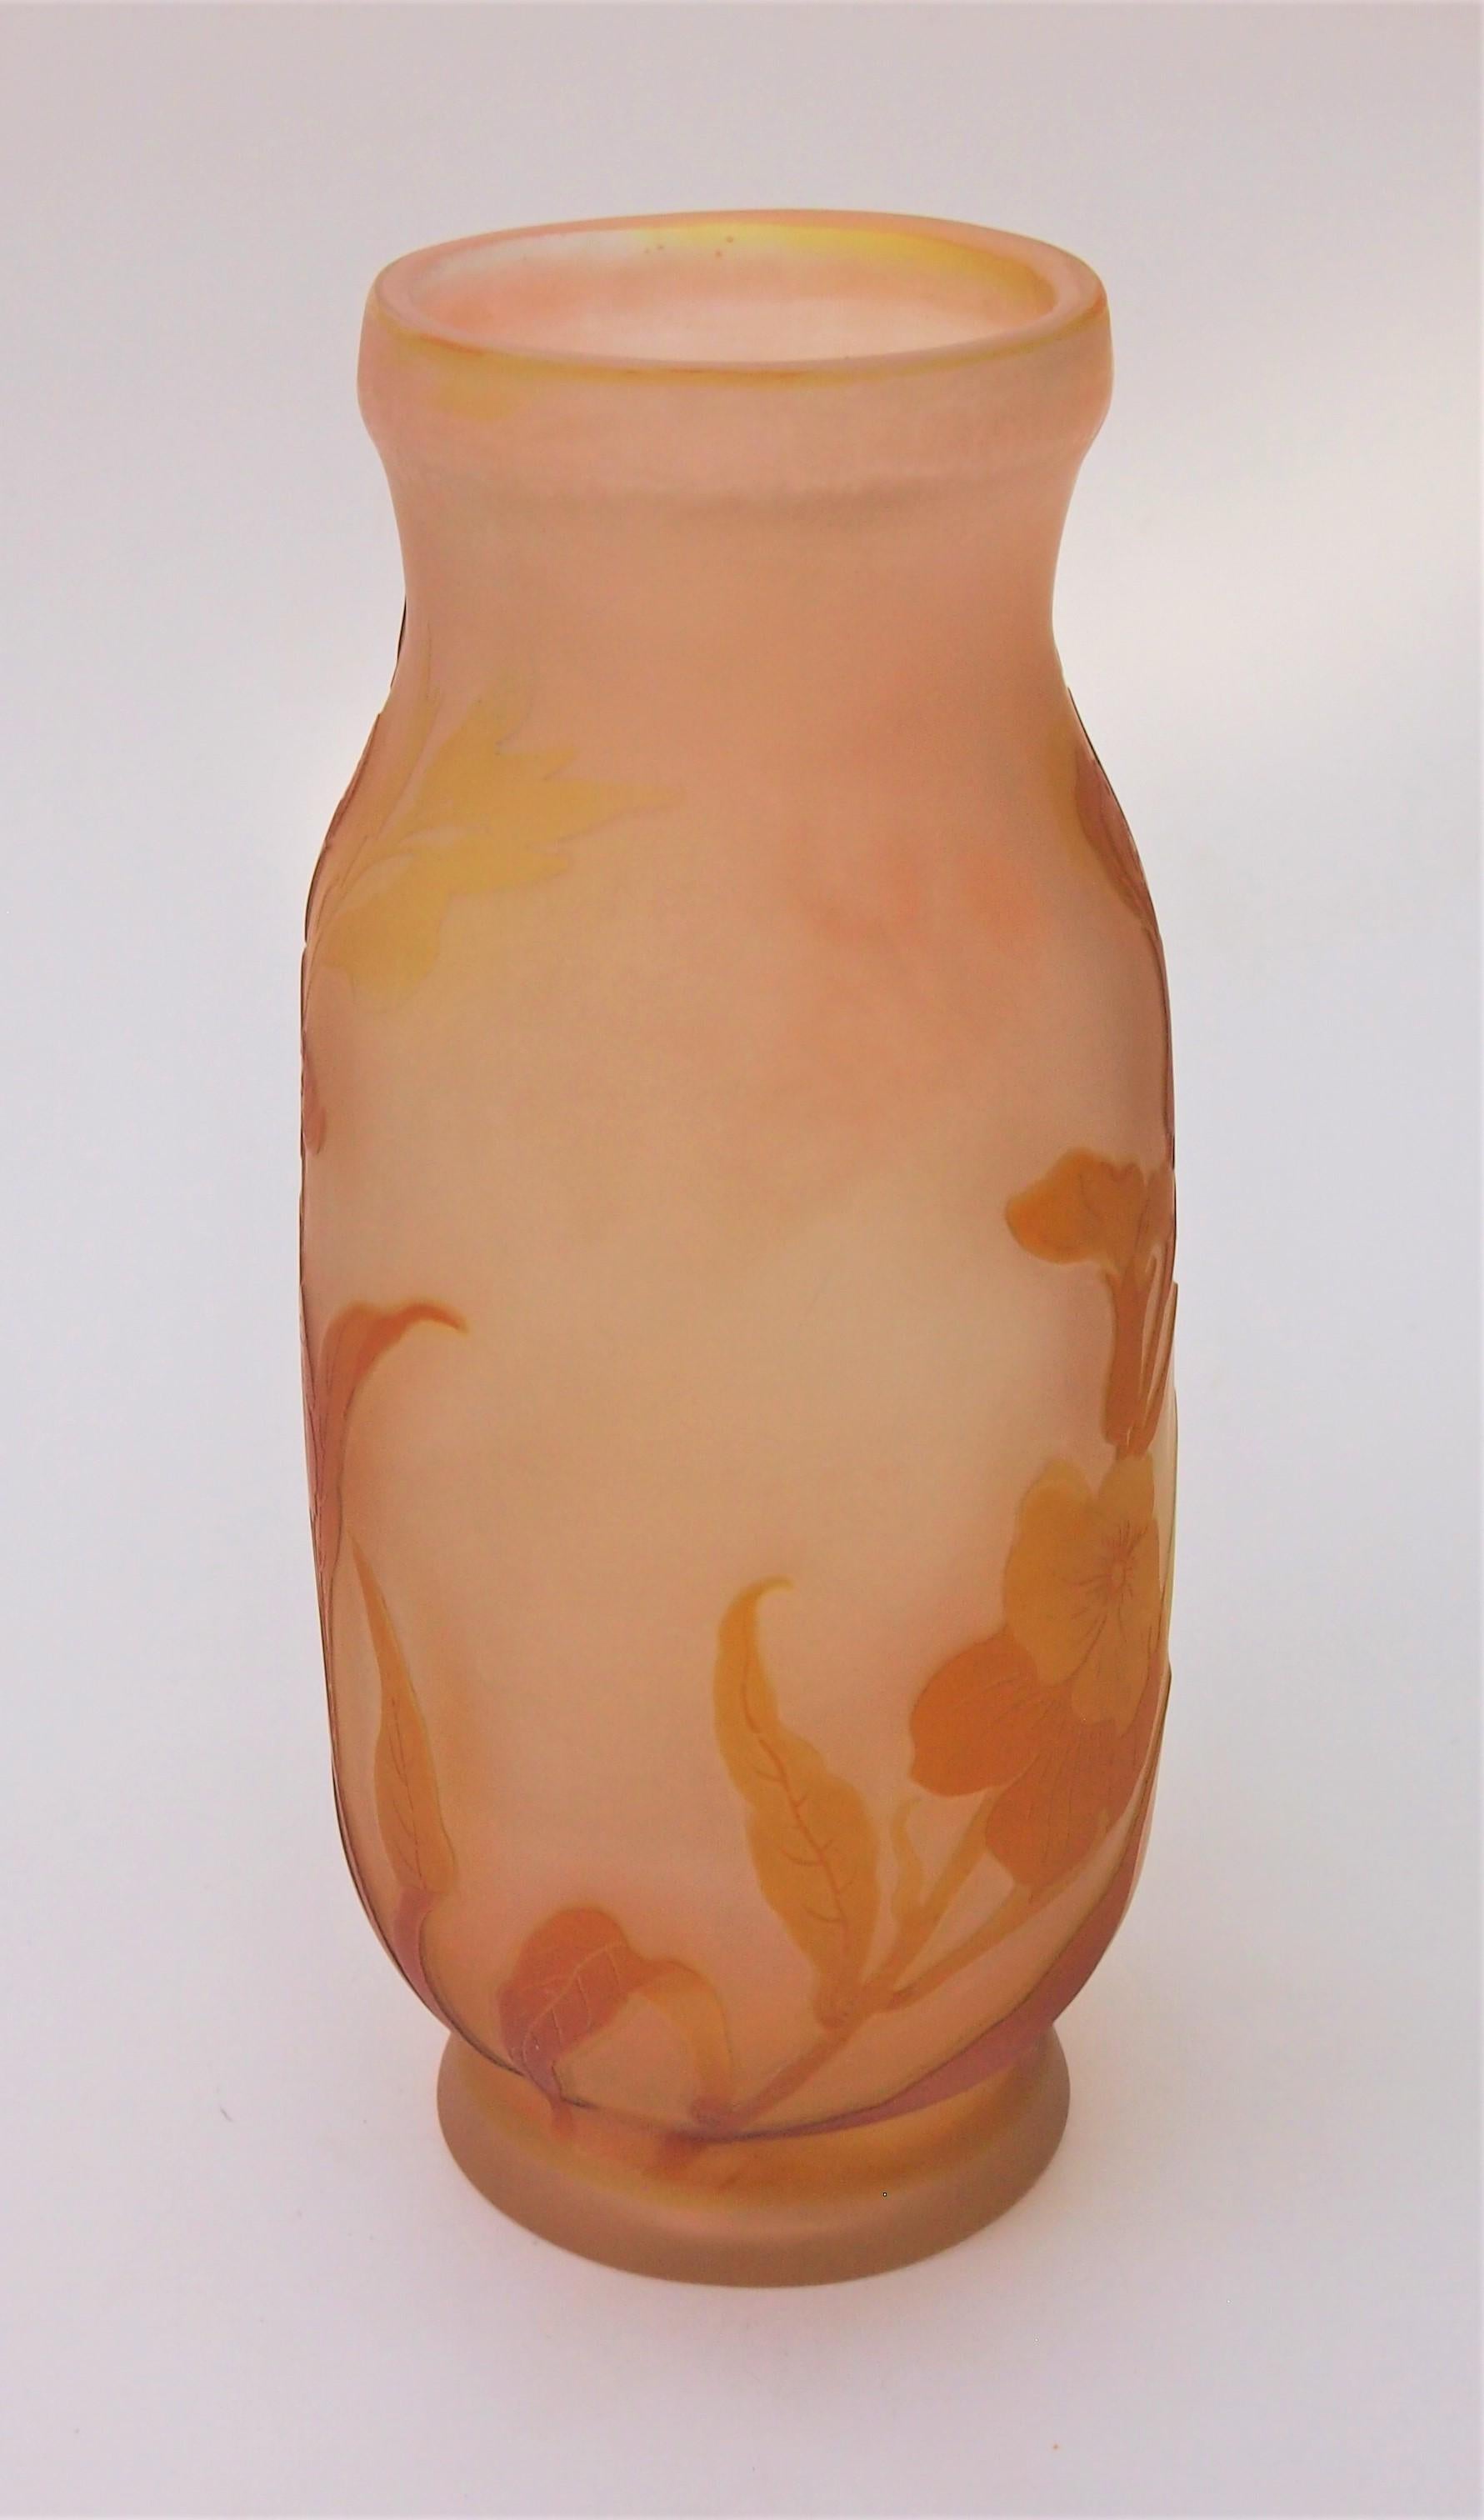 Super early Emile Galle three colour cameo vase in the unusual combination of orange and yellow and pink featuring unusual wild flowers in bloom with a great early signature circa 1899 -see picture 5 

Emile Galle was probably the greatest glass